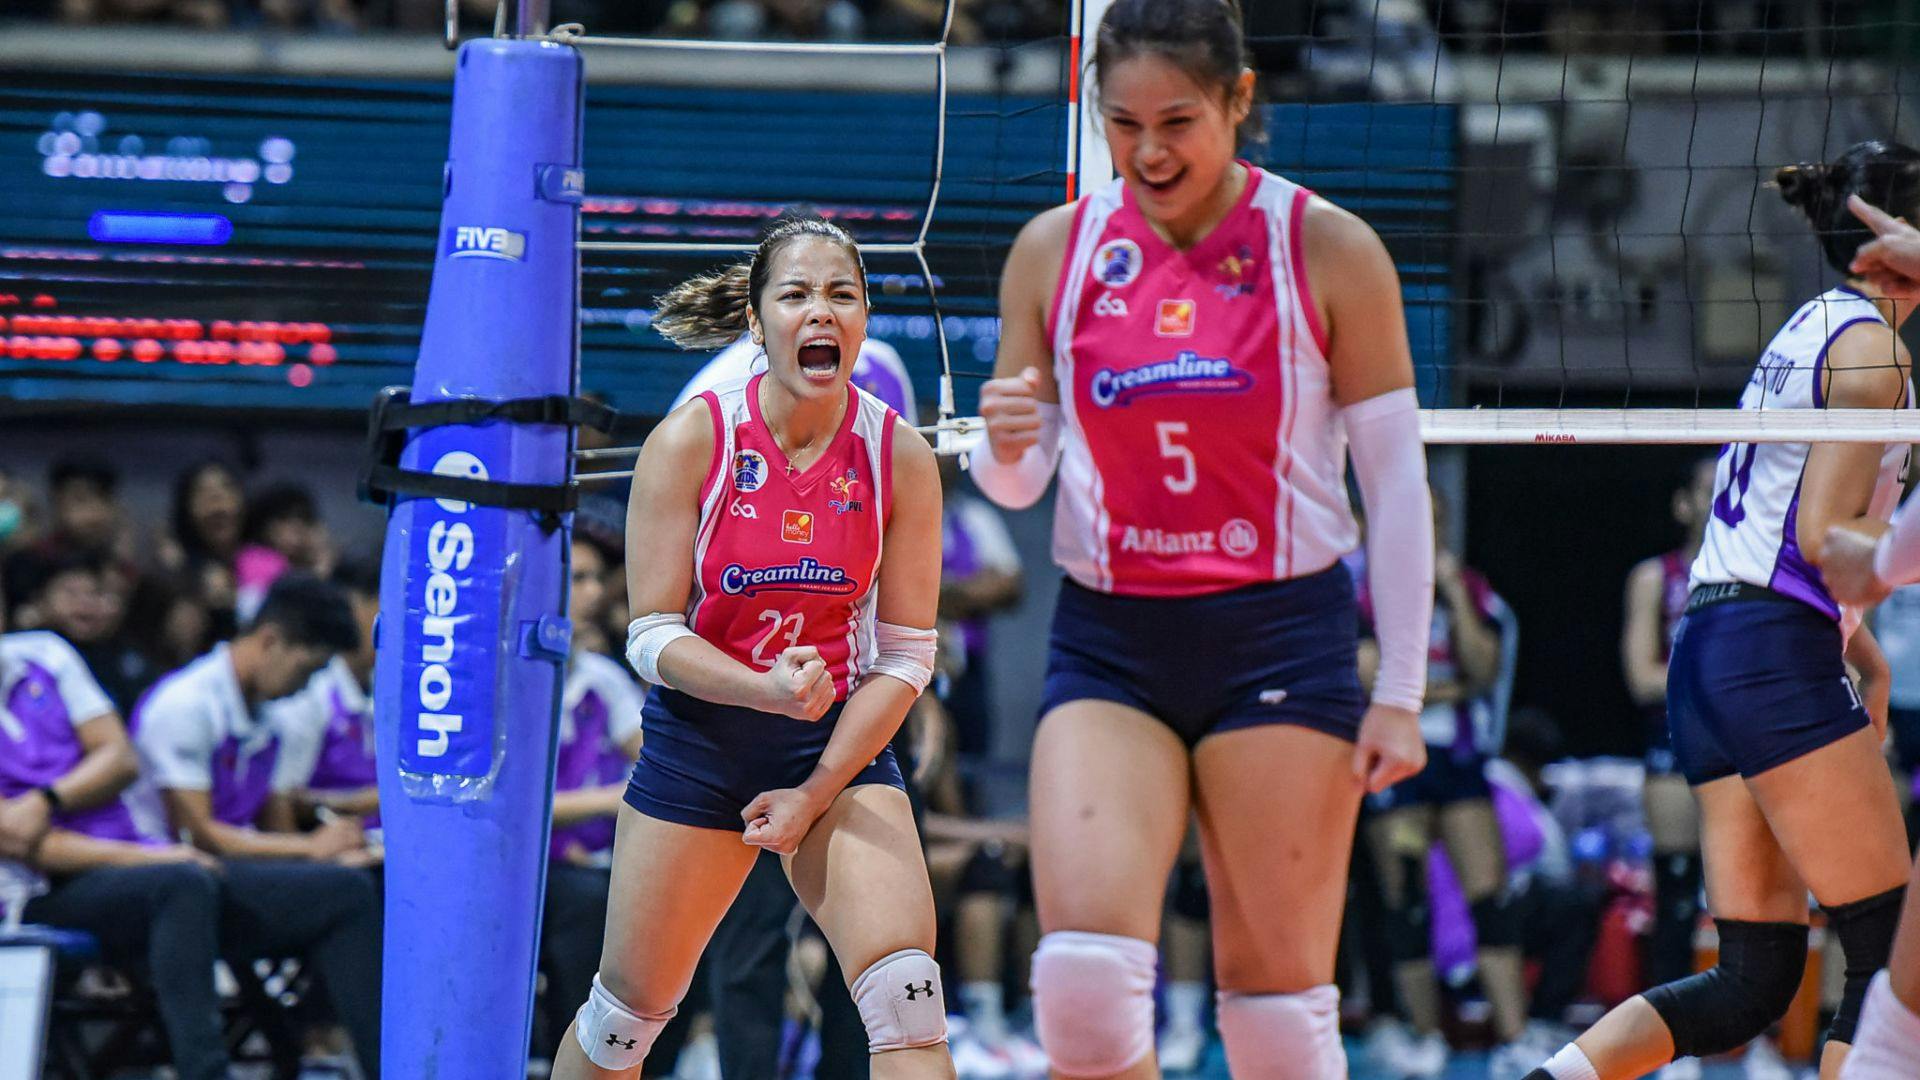 Creamline goes unbeaten, sweeps Choco Mucho to claim PVL Second All-Filipino Conference crown